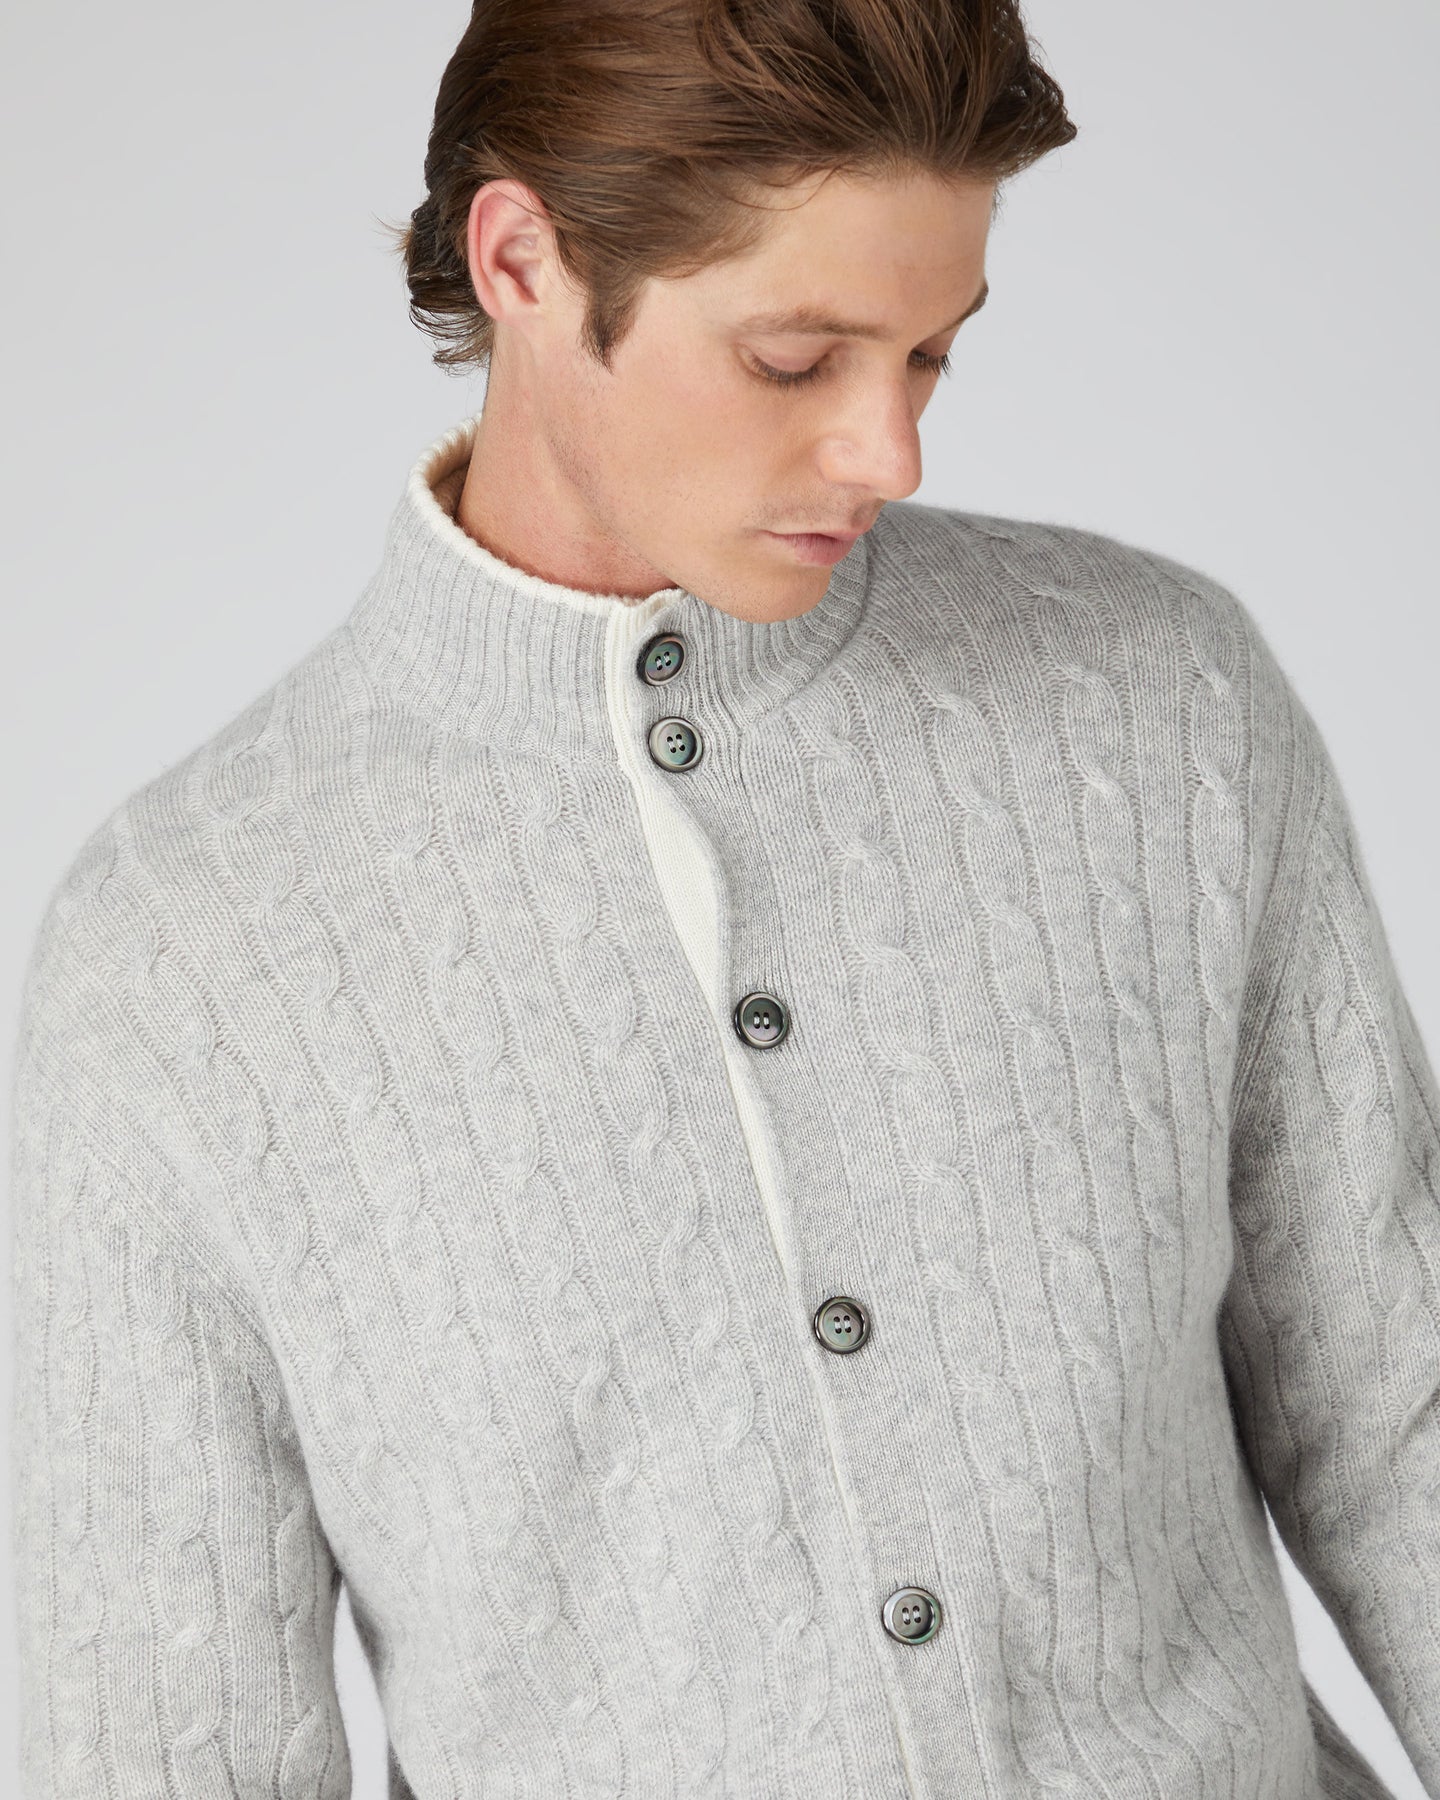 Men's Cable Button Cashmere Cardigan Fumo Grey + New Ivory White | N.Peal